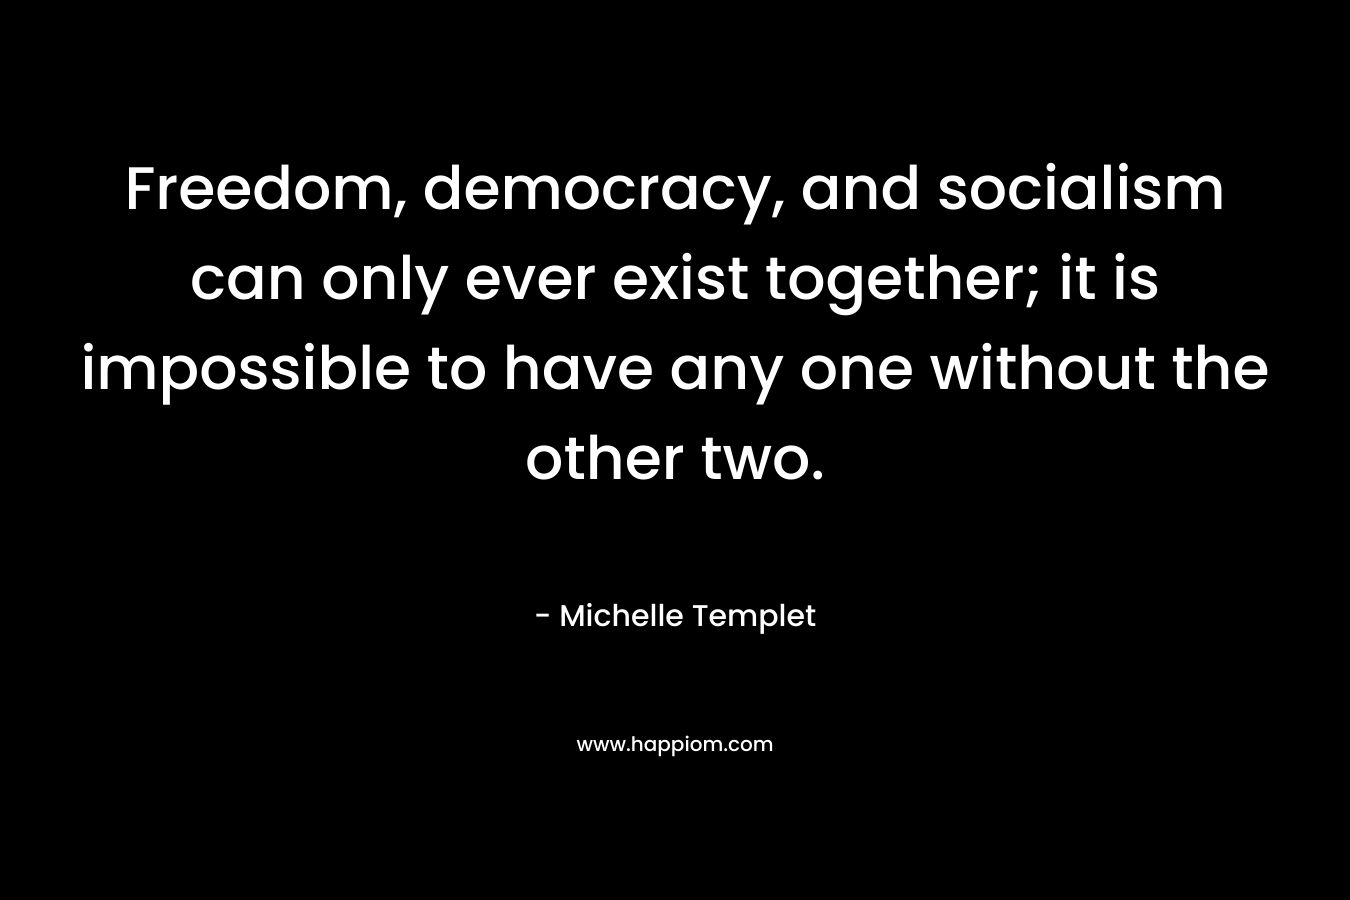 Freedom, democracy, and socialism can only ever exist together; it is impossible to have any one without the other two.